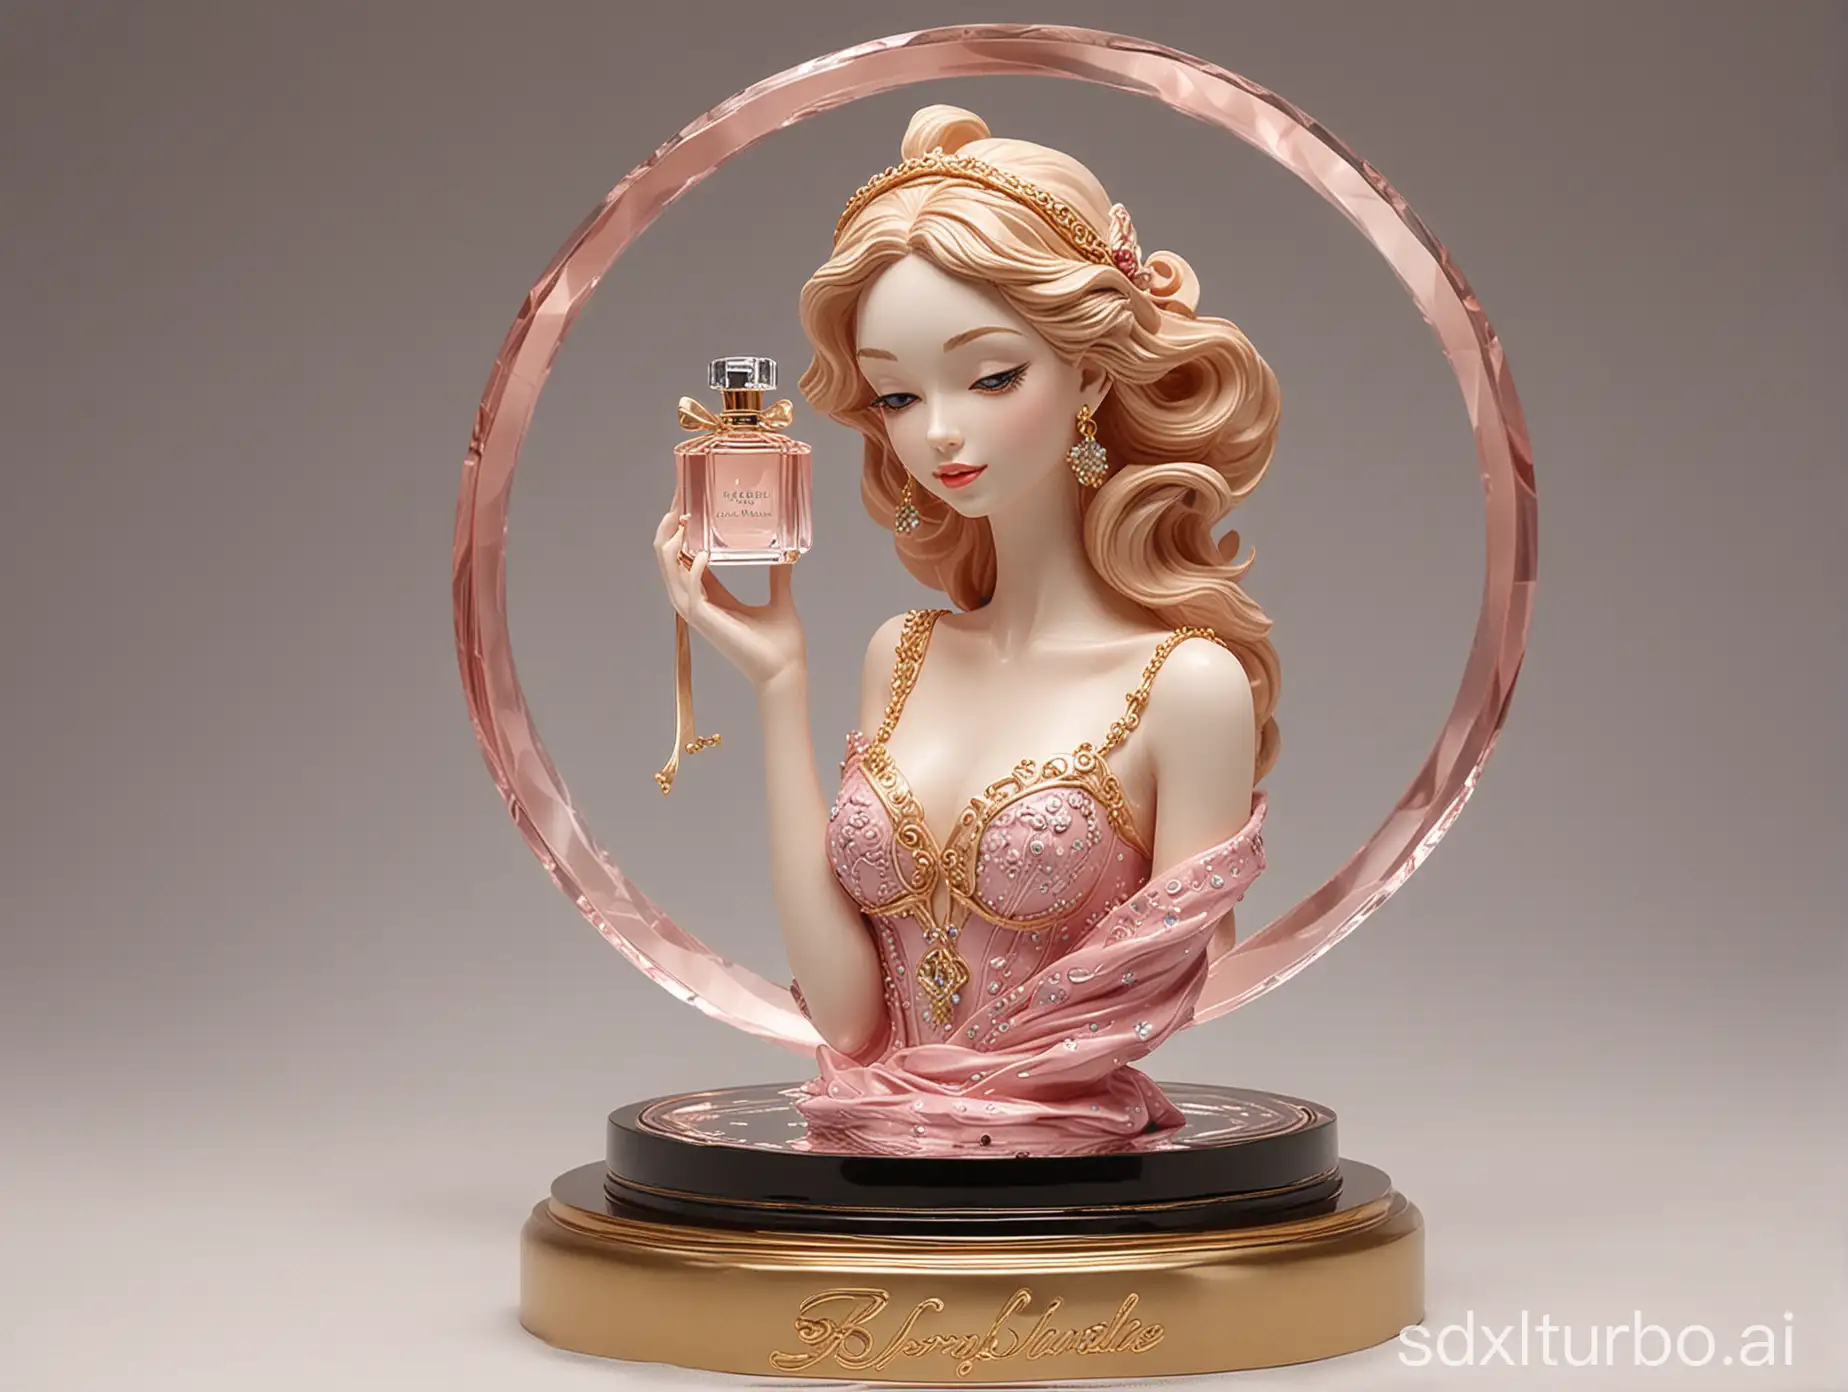 Elegant-Lady-Perfume-Package-Sculpture-in-Round-Form